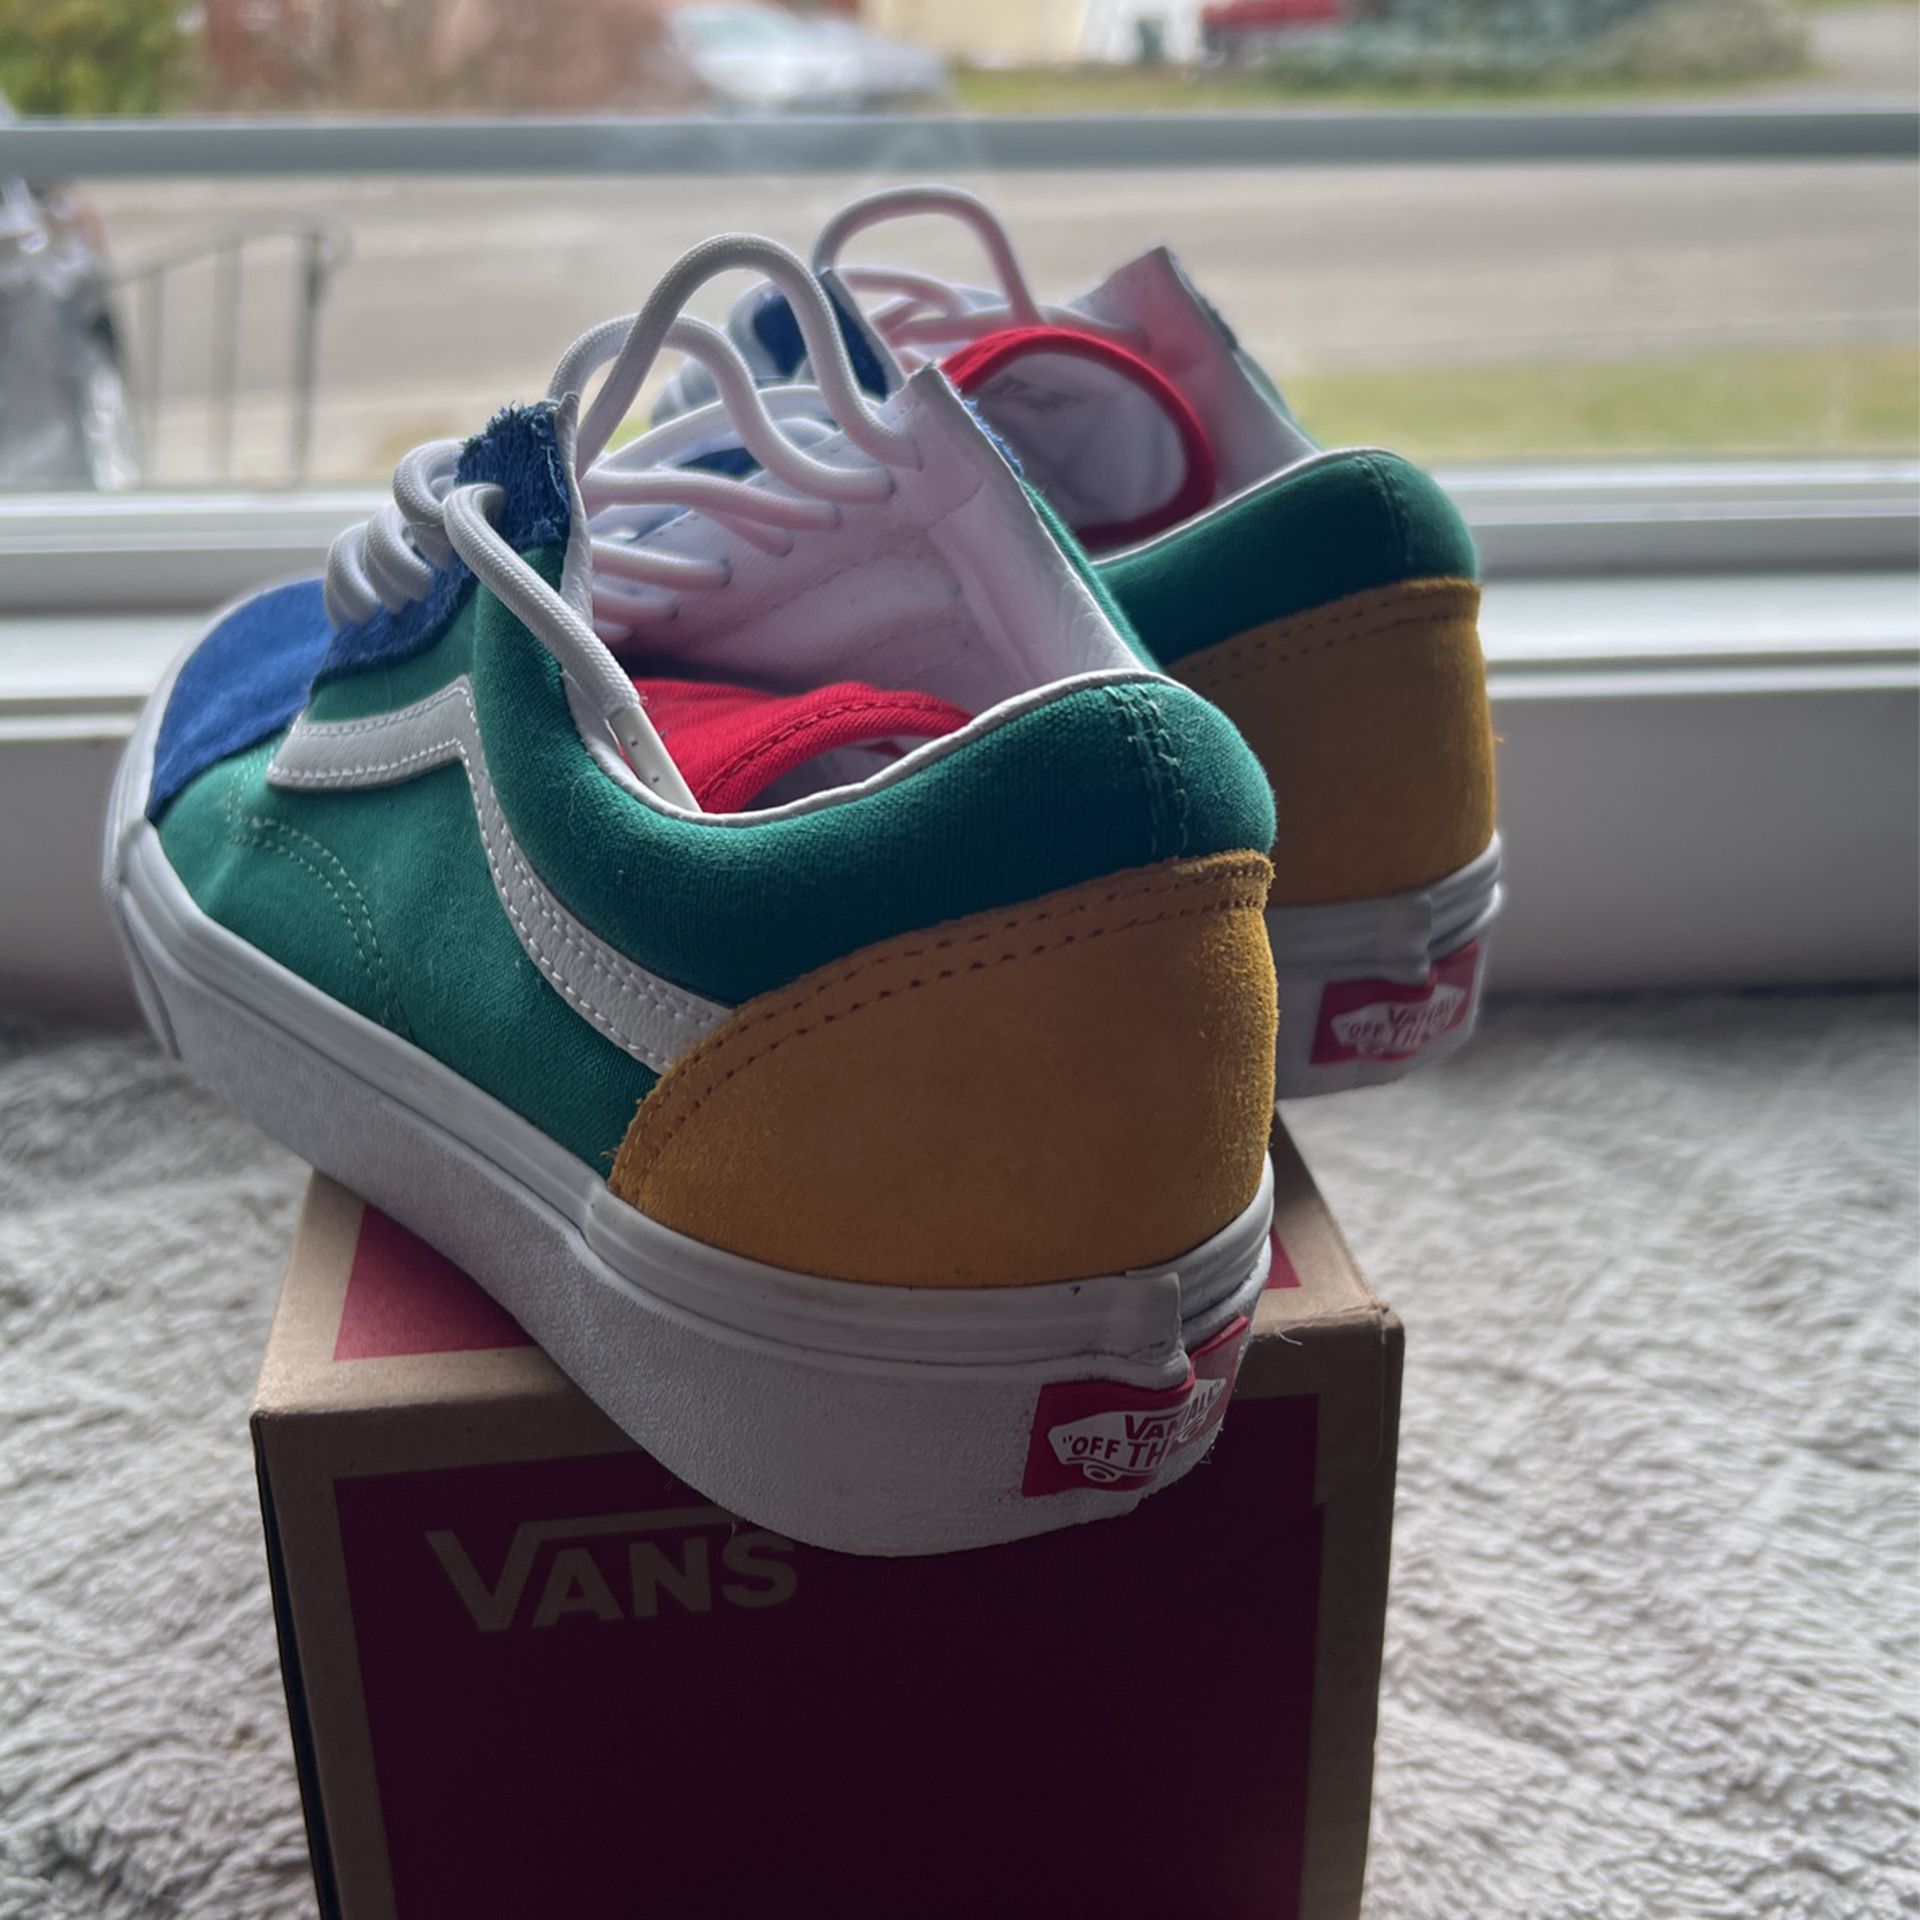 Vintage Vans Skate Shoes for Sale in Woodinville, WA - OfferUp